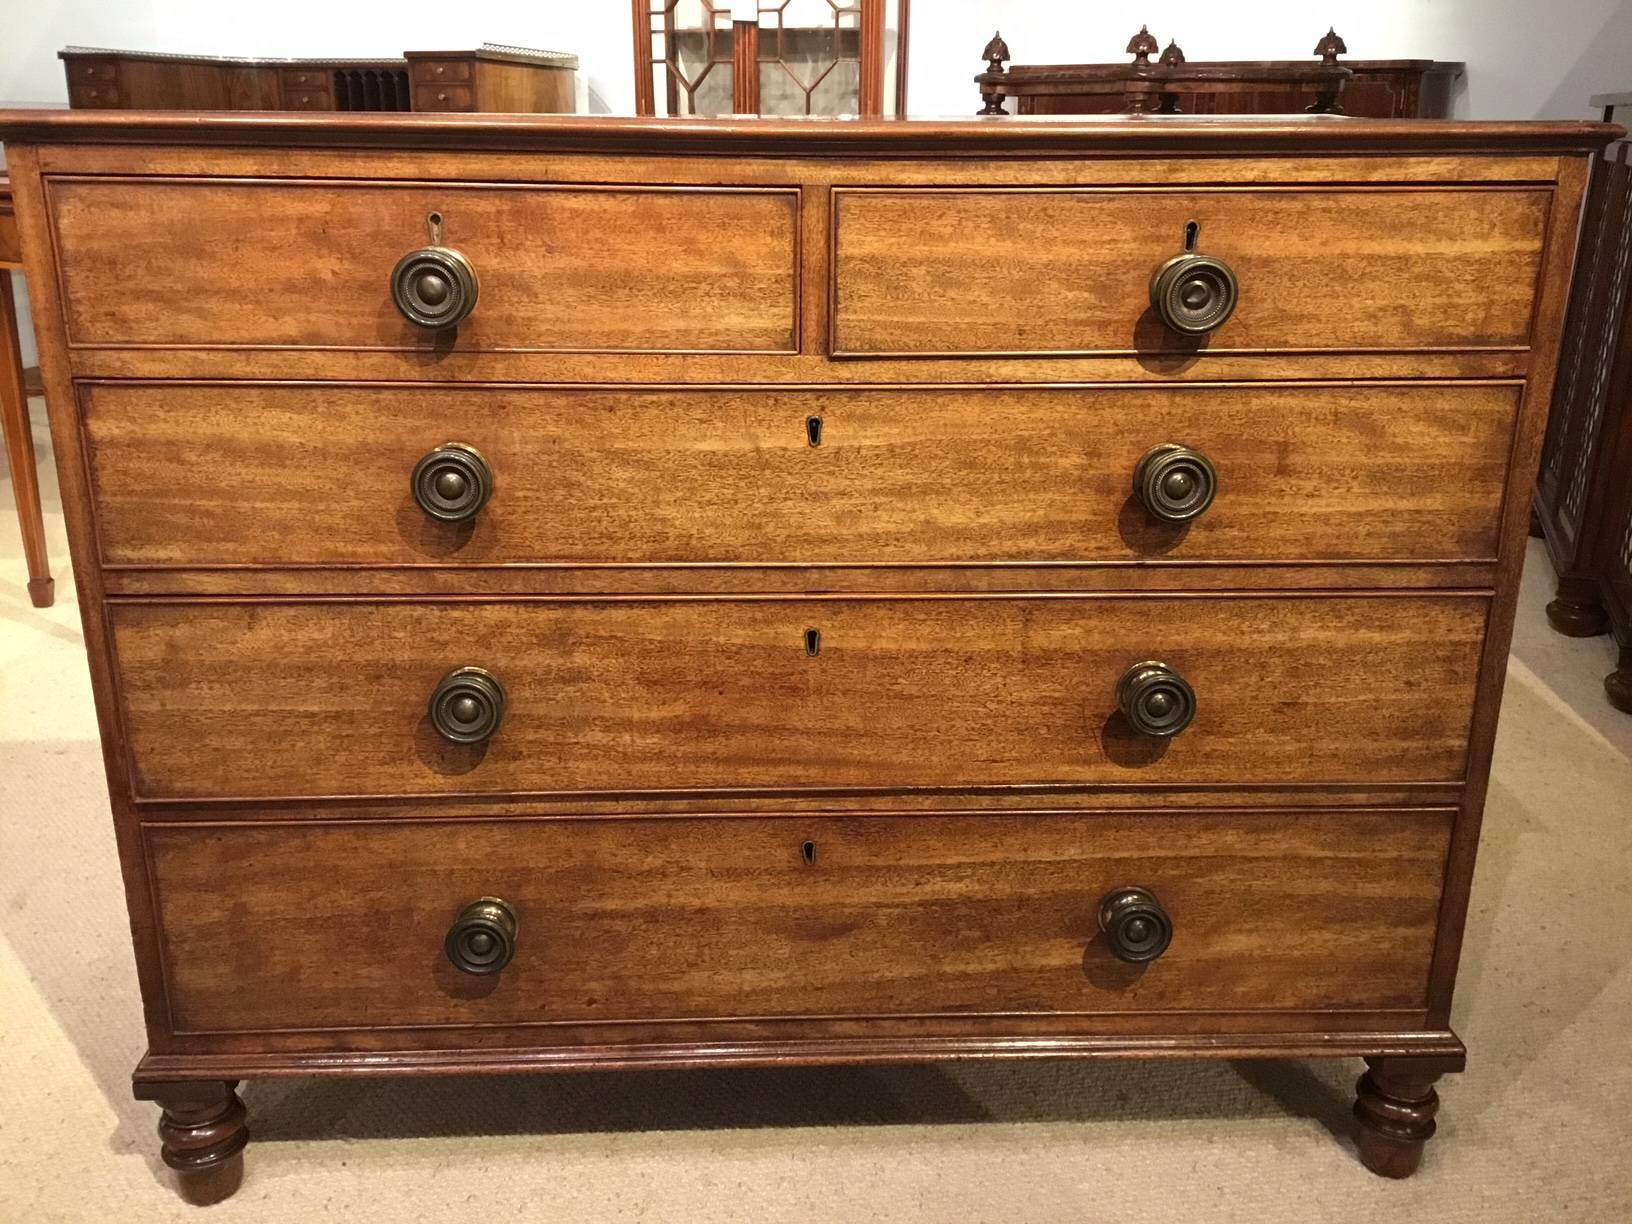 Regency Mahogany Georgian Chest of Drawers by Gillows of Lancaster